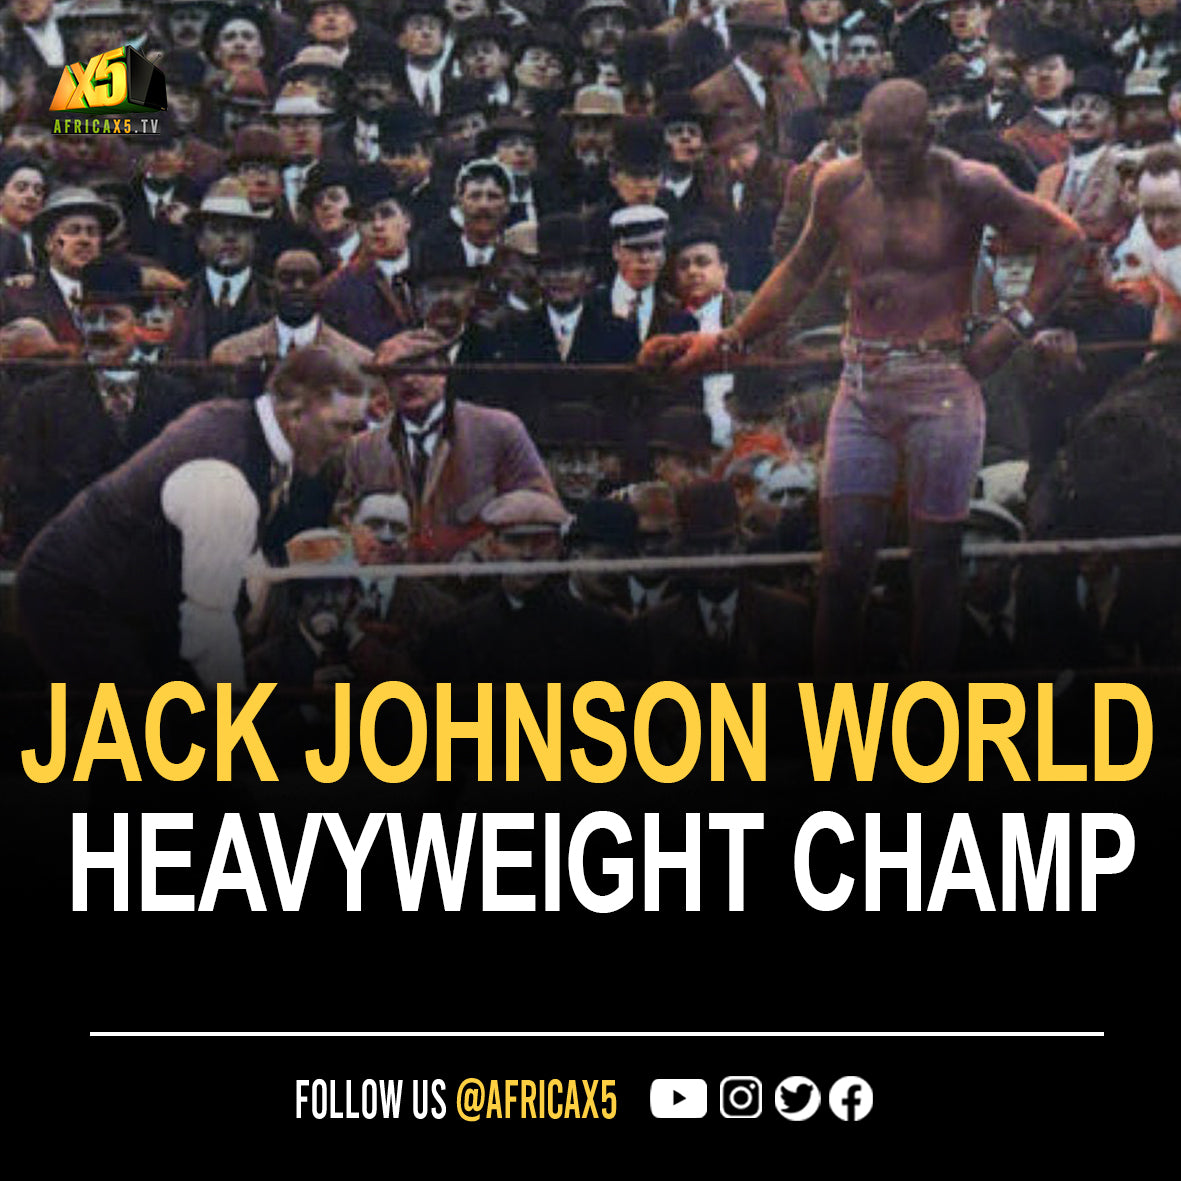 Jack Johnson became the first black American World Heavyweight Boxing Champion